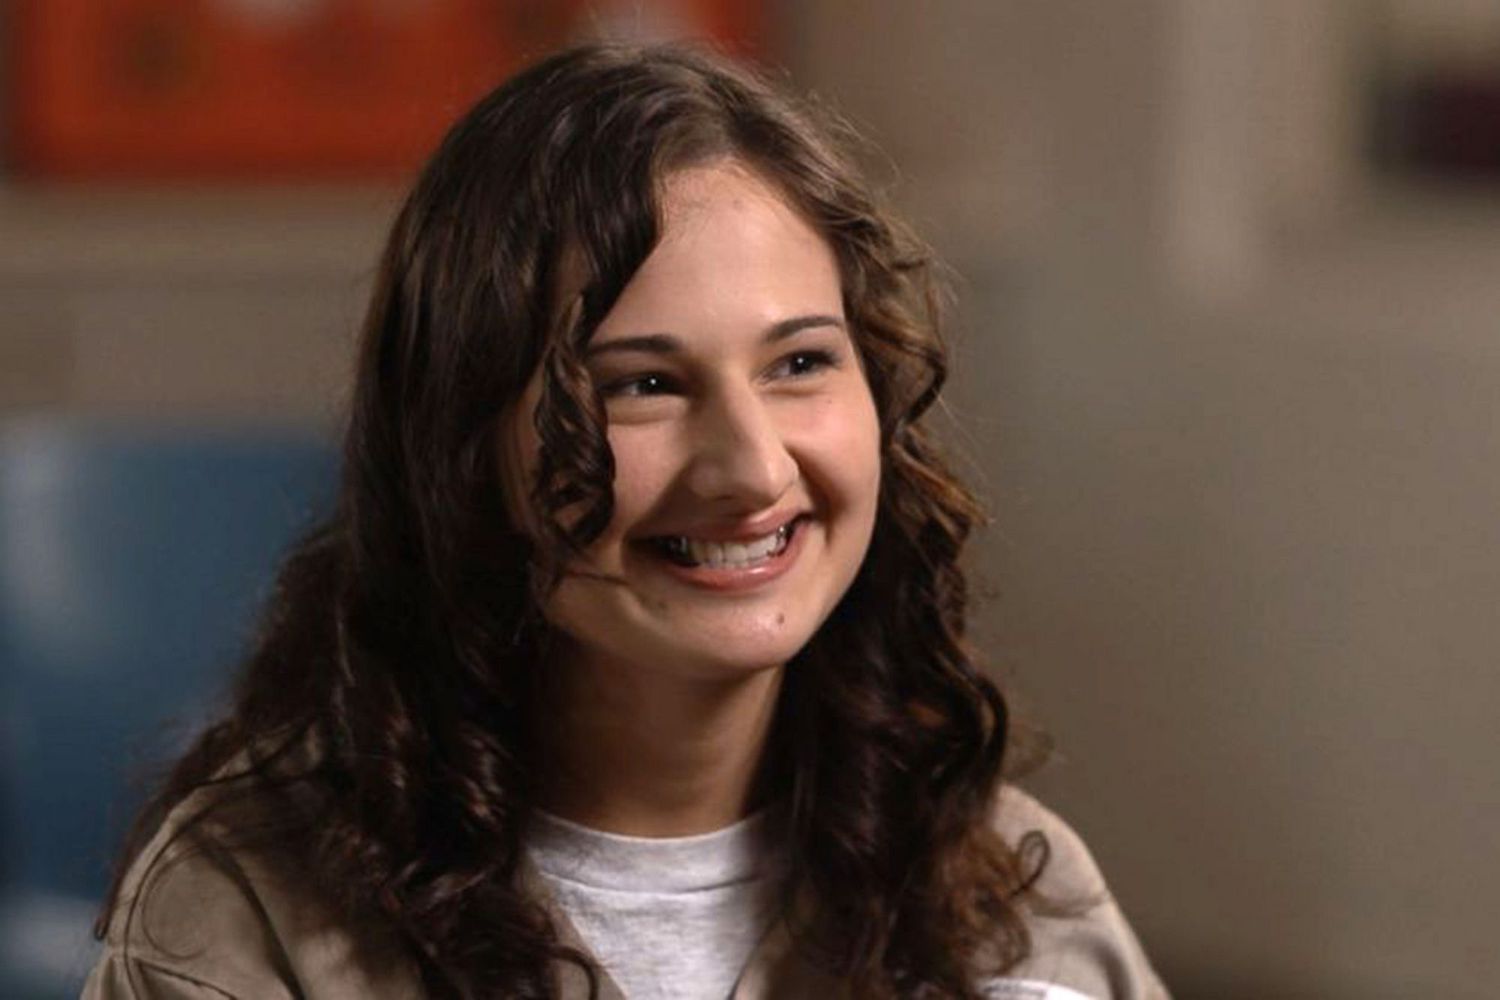 Gypsy Rose Blanchard To Be Released From Prison After 7 Years